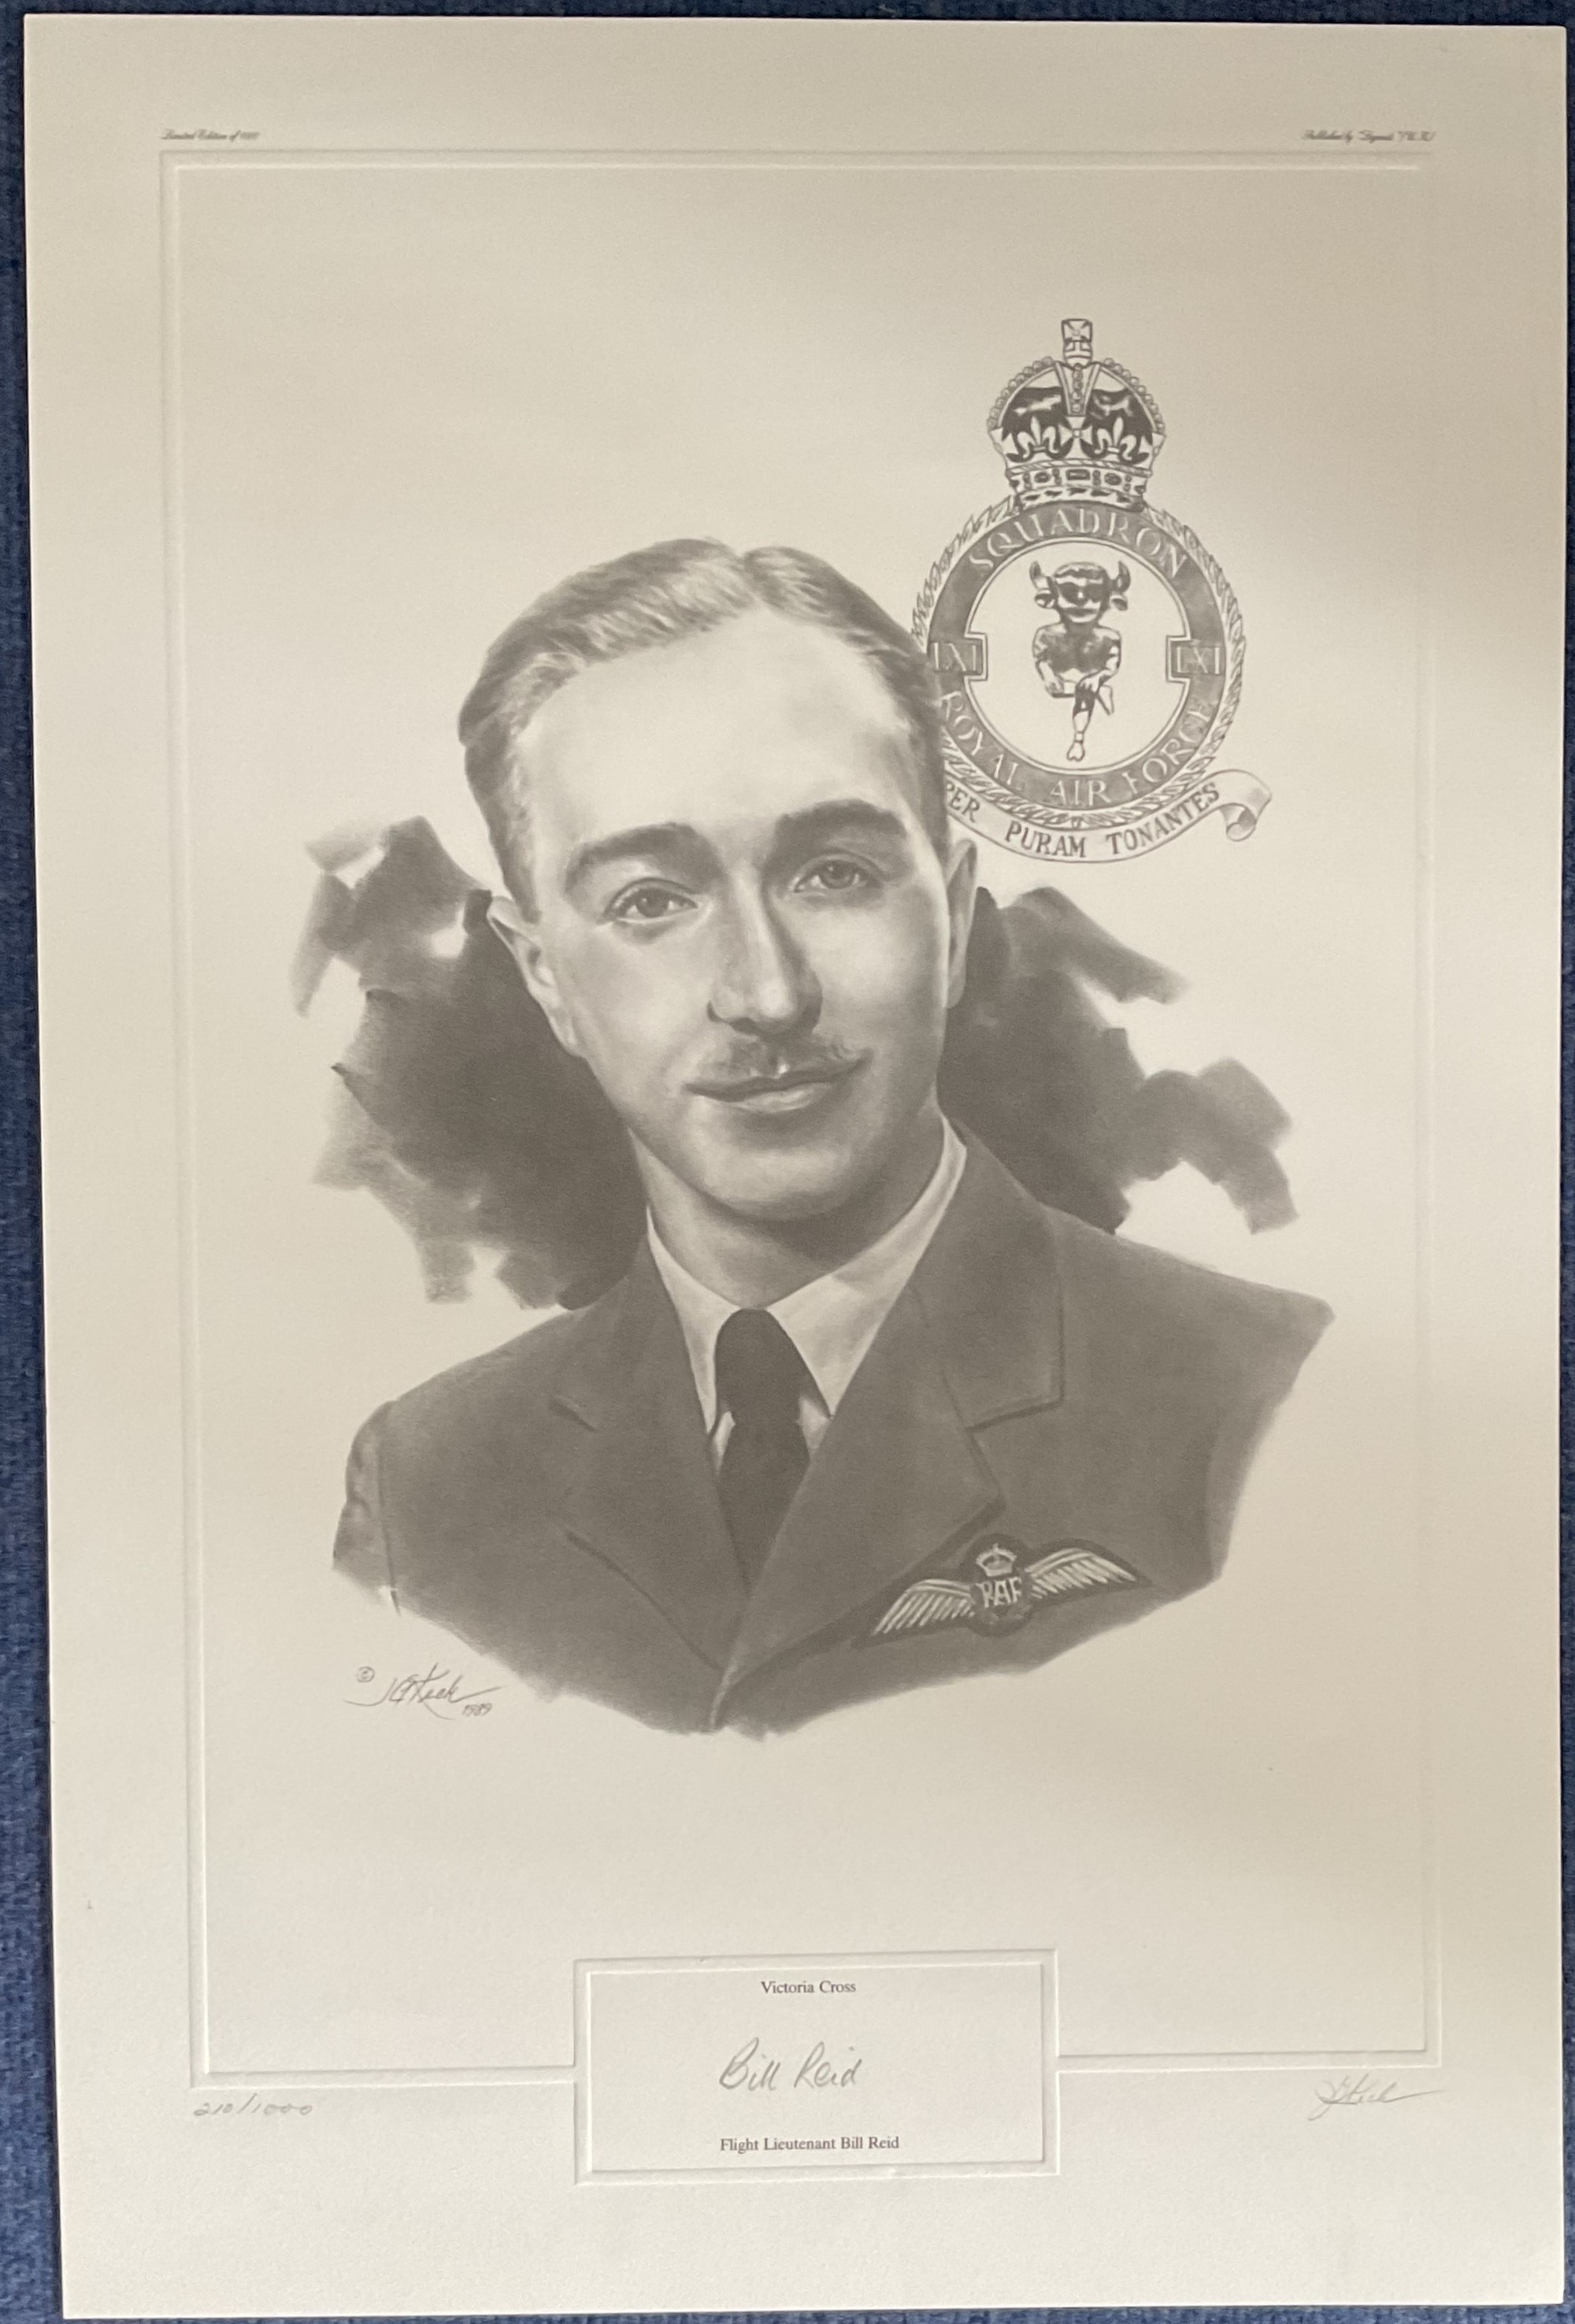 WW2 Flt Lt Bill Reid VC Signed on 210 of 1000 Black and White Print of Bill Reid. Also Signed by the